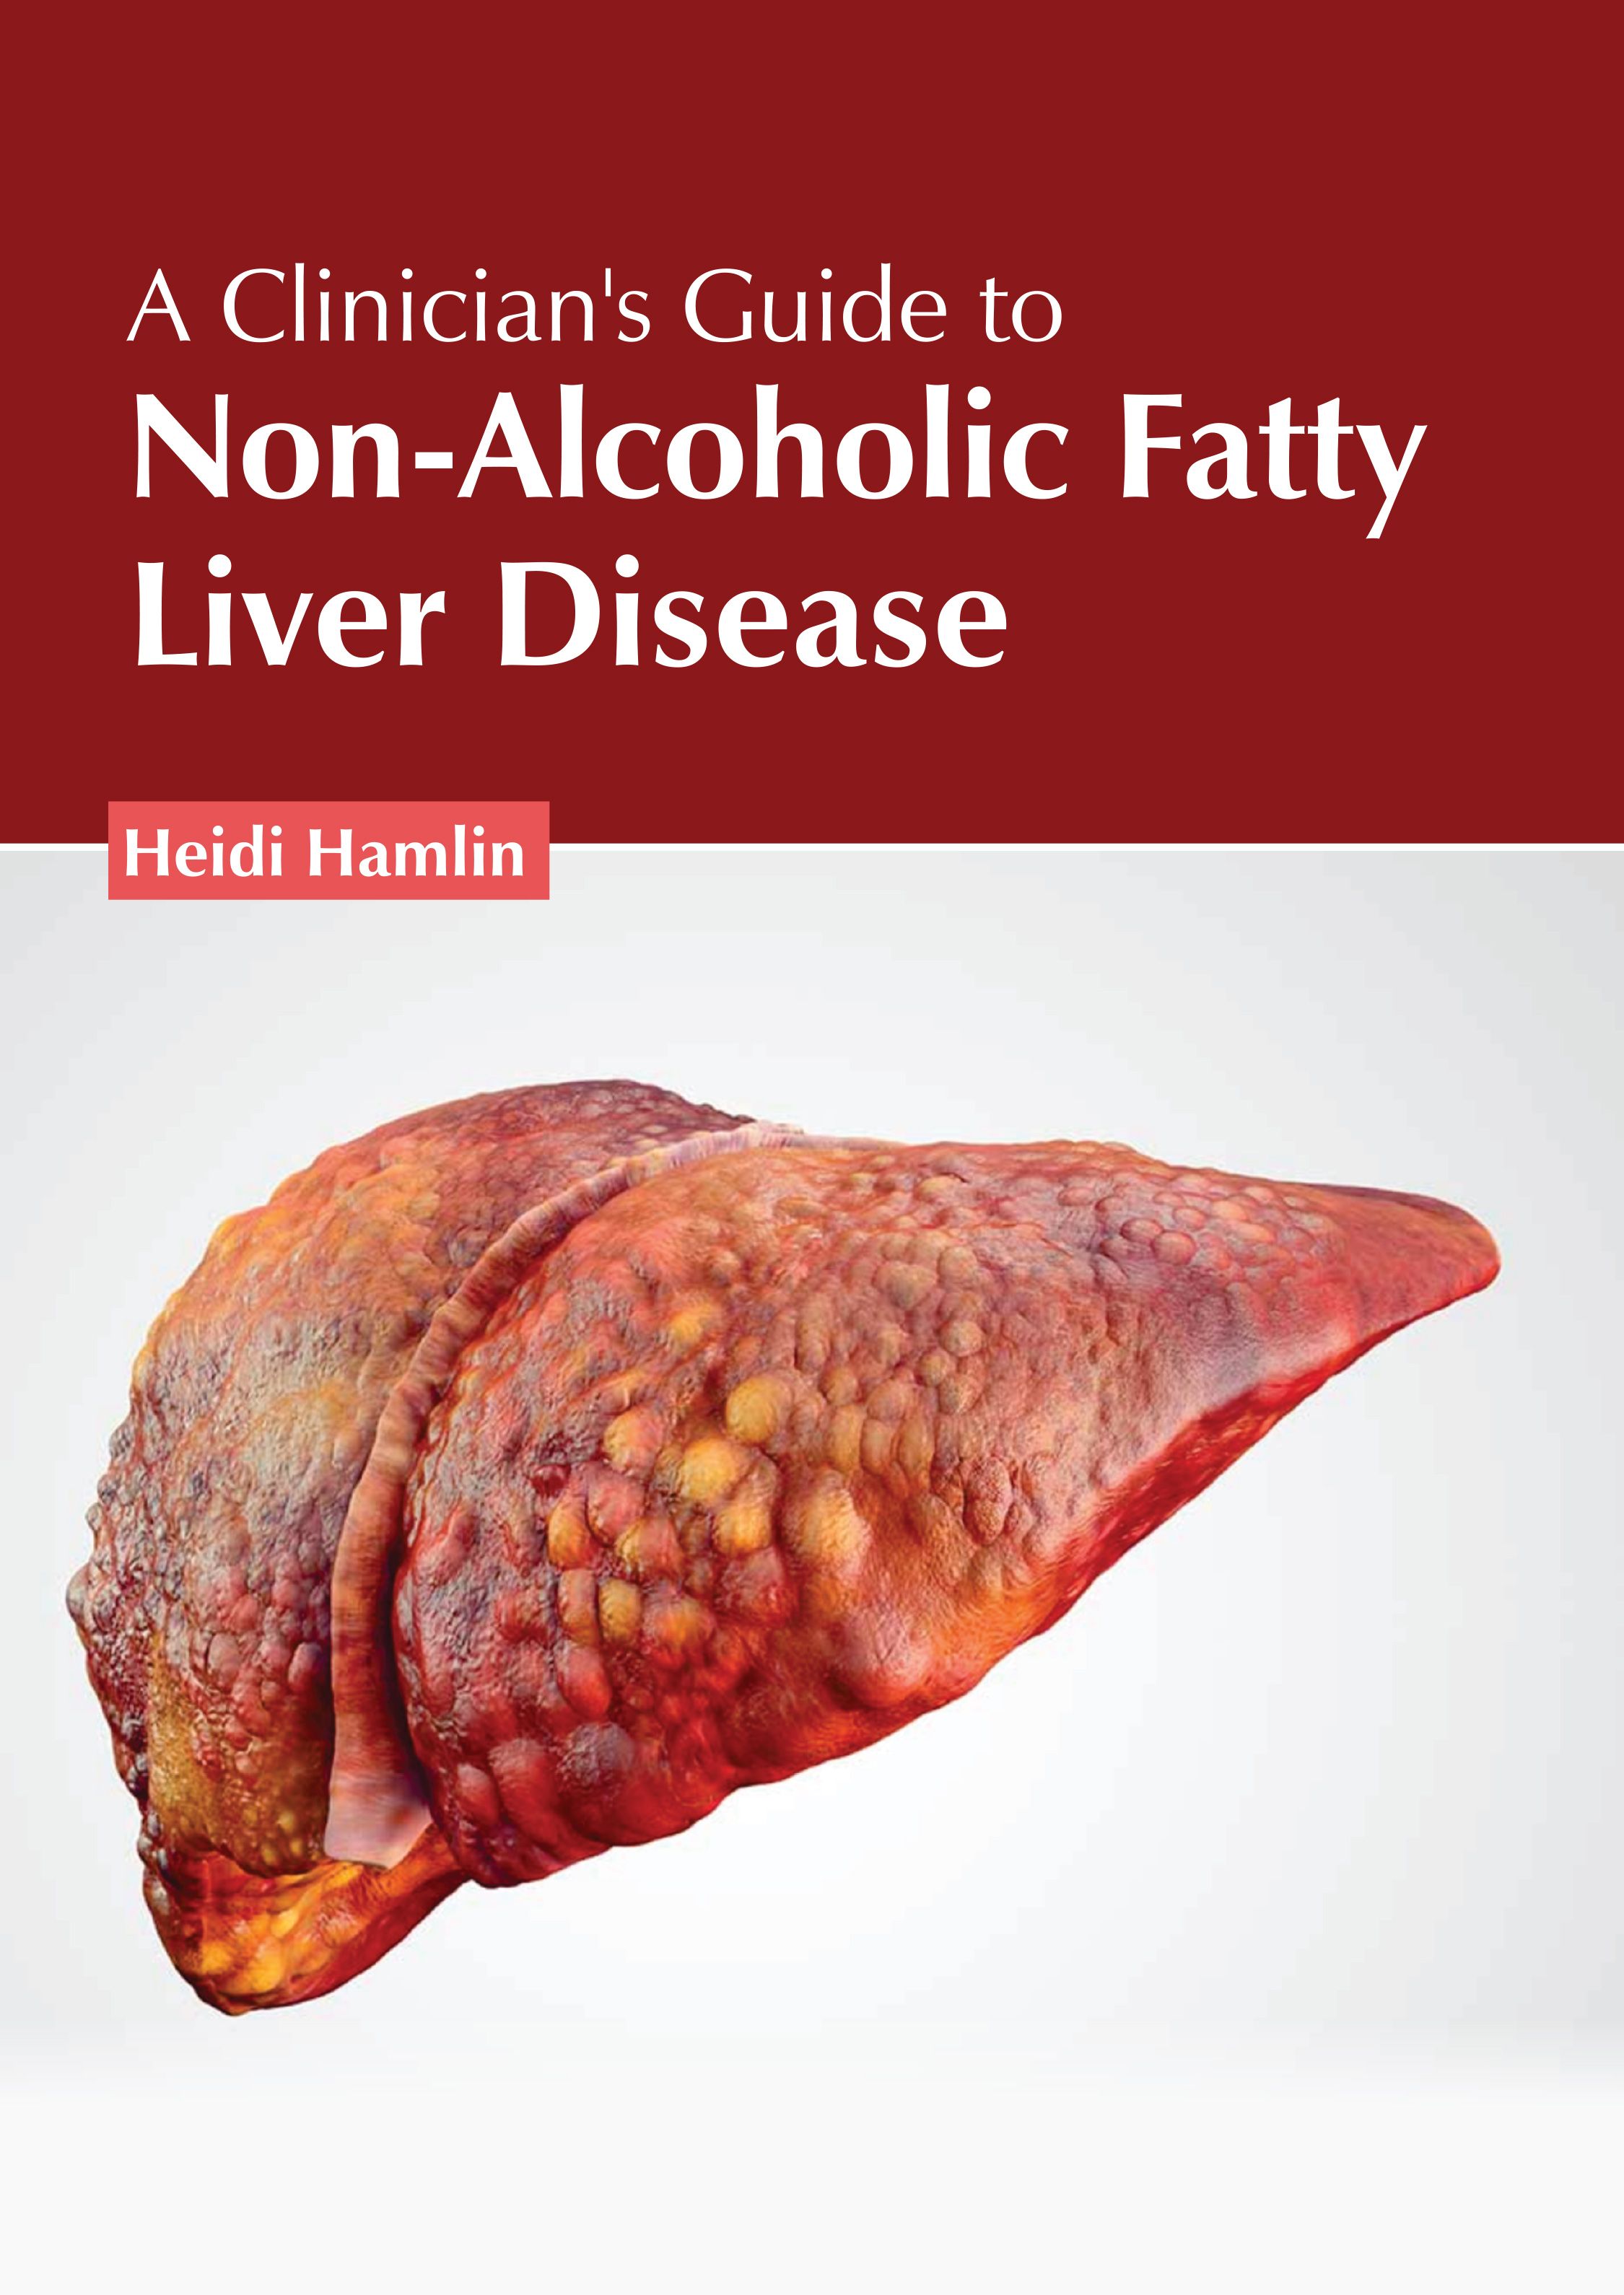 

medical-reference-books/gastroenterology/a-clinician-s-guide-to-non-alcoholic-fatty-liver-disease-9781639275779